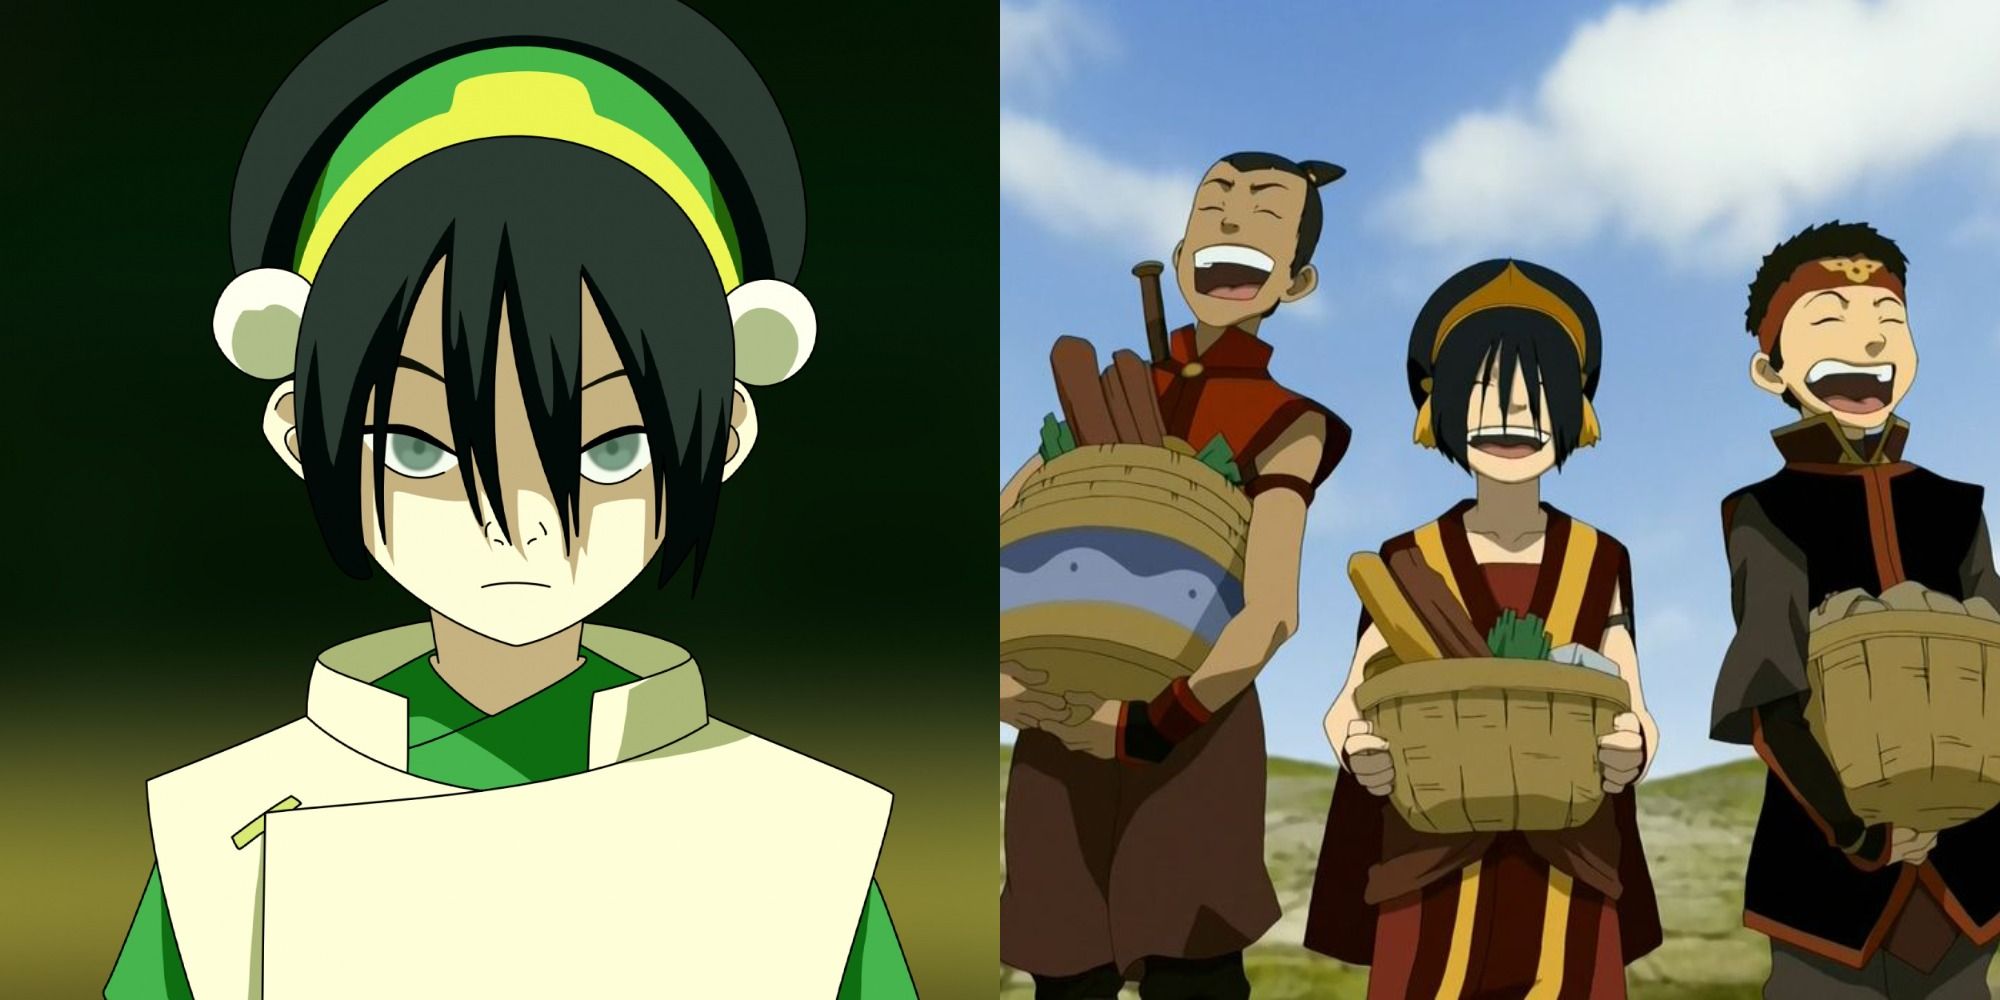 Split image showing Toph alone and with two others in Avatar The Last Airbender